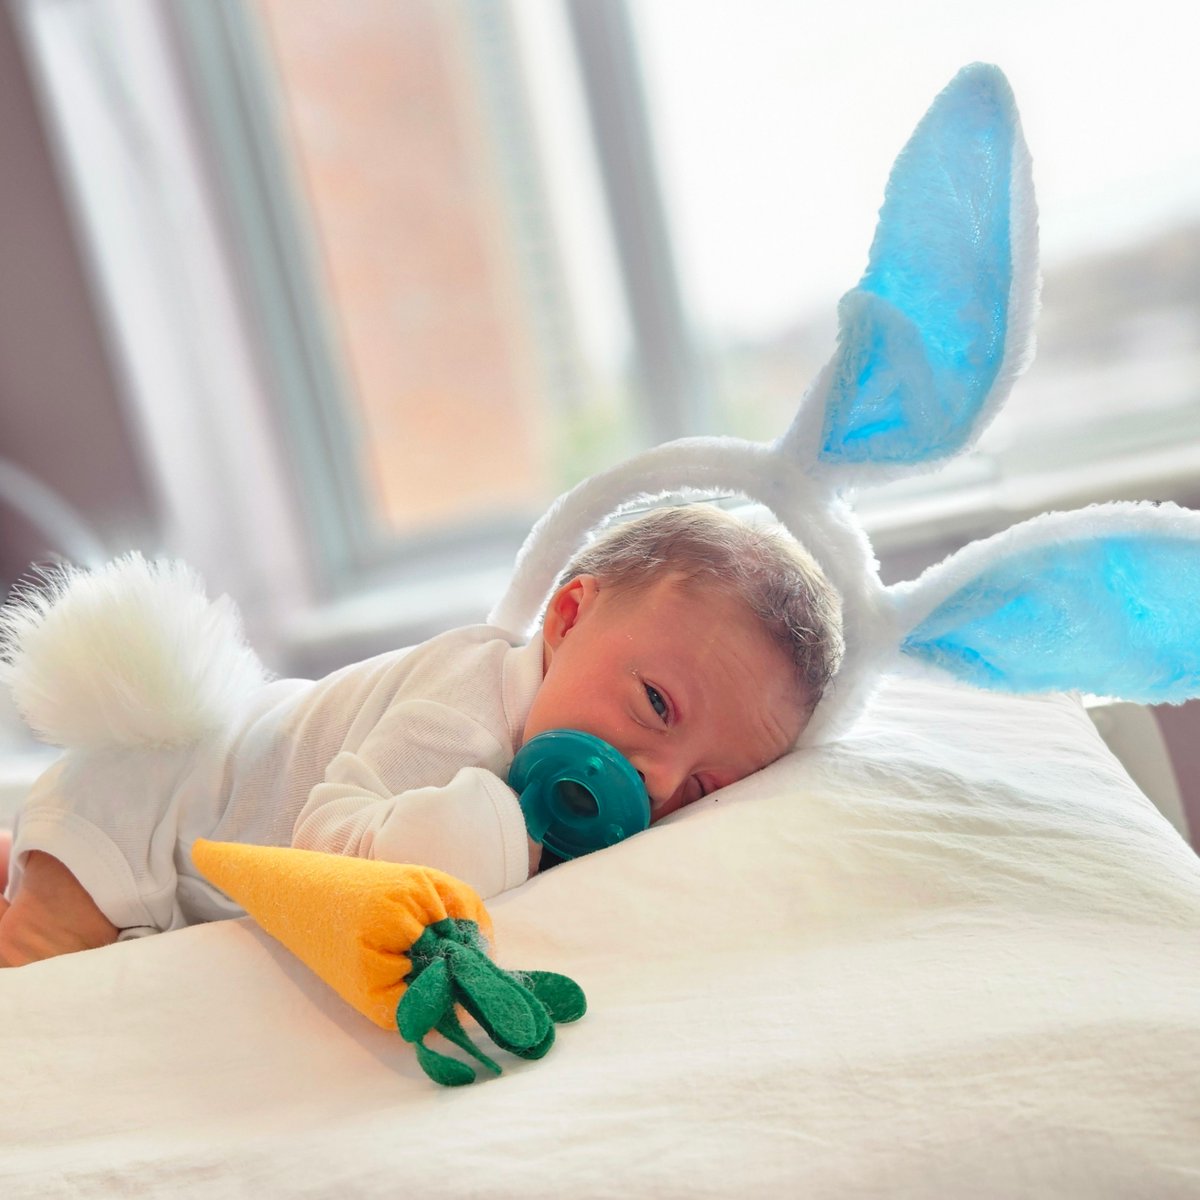 Happy Easter from all of us at Mount Auburn Hospital! Some extra special deliveries arrived this weekend — wishing a warm welcome to our little Easter bunnies born today! 🐣🌷 #EasterBabies #EasterArrival